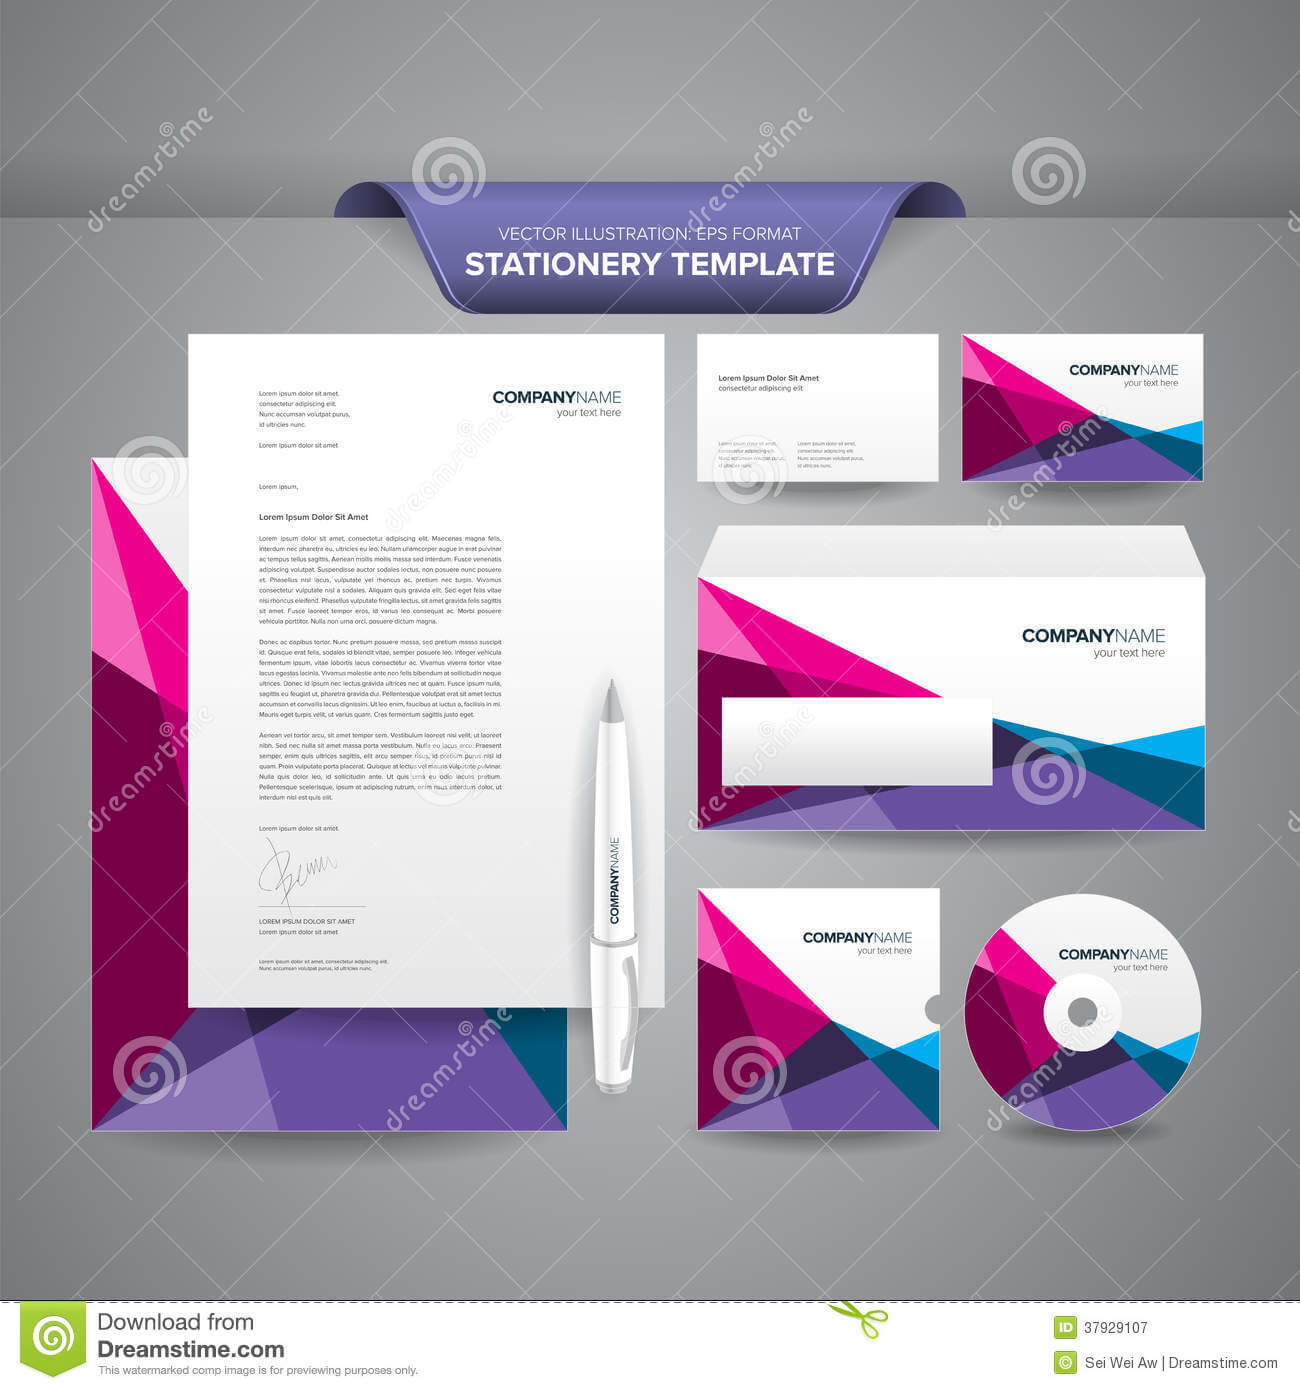 Stationery Template Polygonal Stock Vector – Illustration Of For Business Card Letterhead Envelope Template